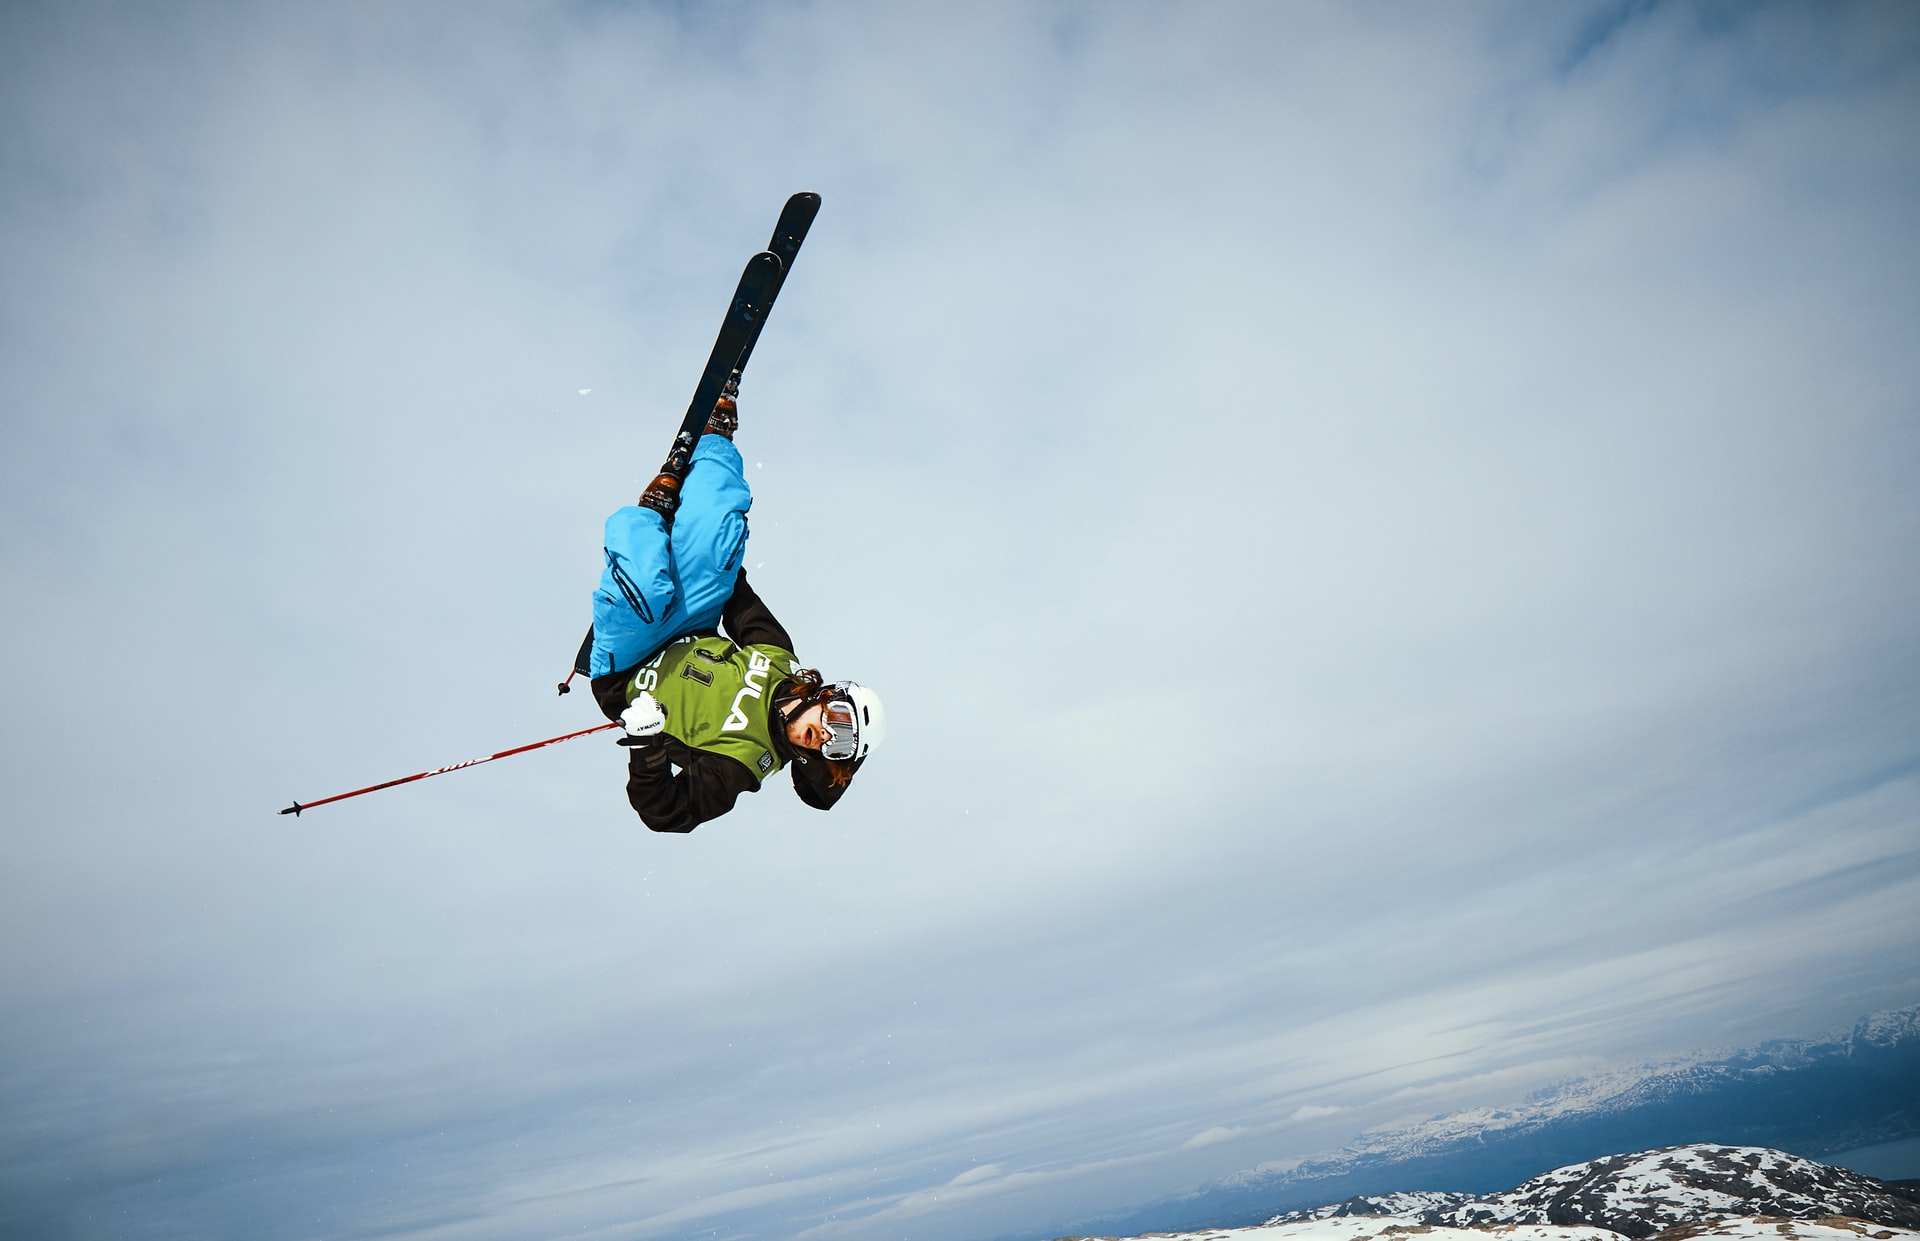 Do People Easily Get Addicted to Extreme Sports? – How Dangerous Are They?